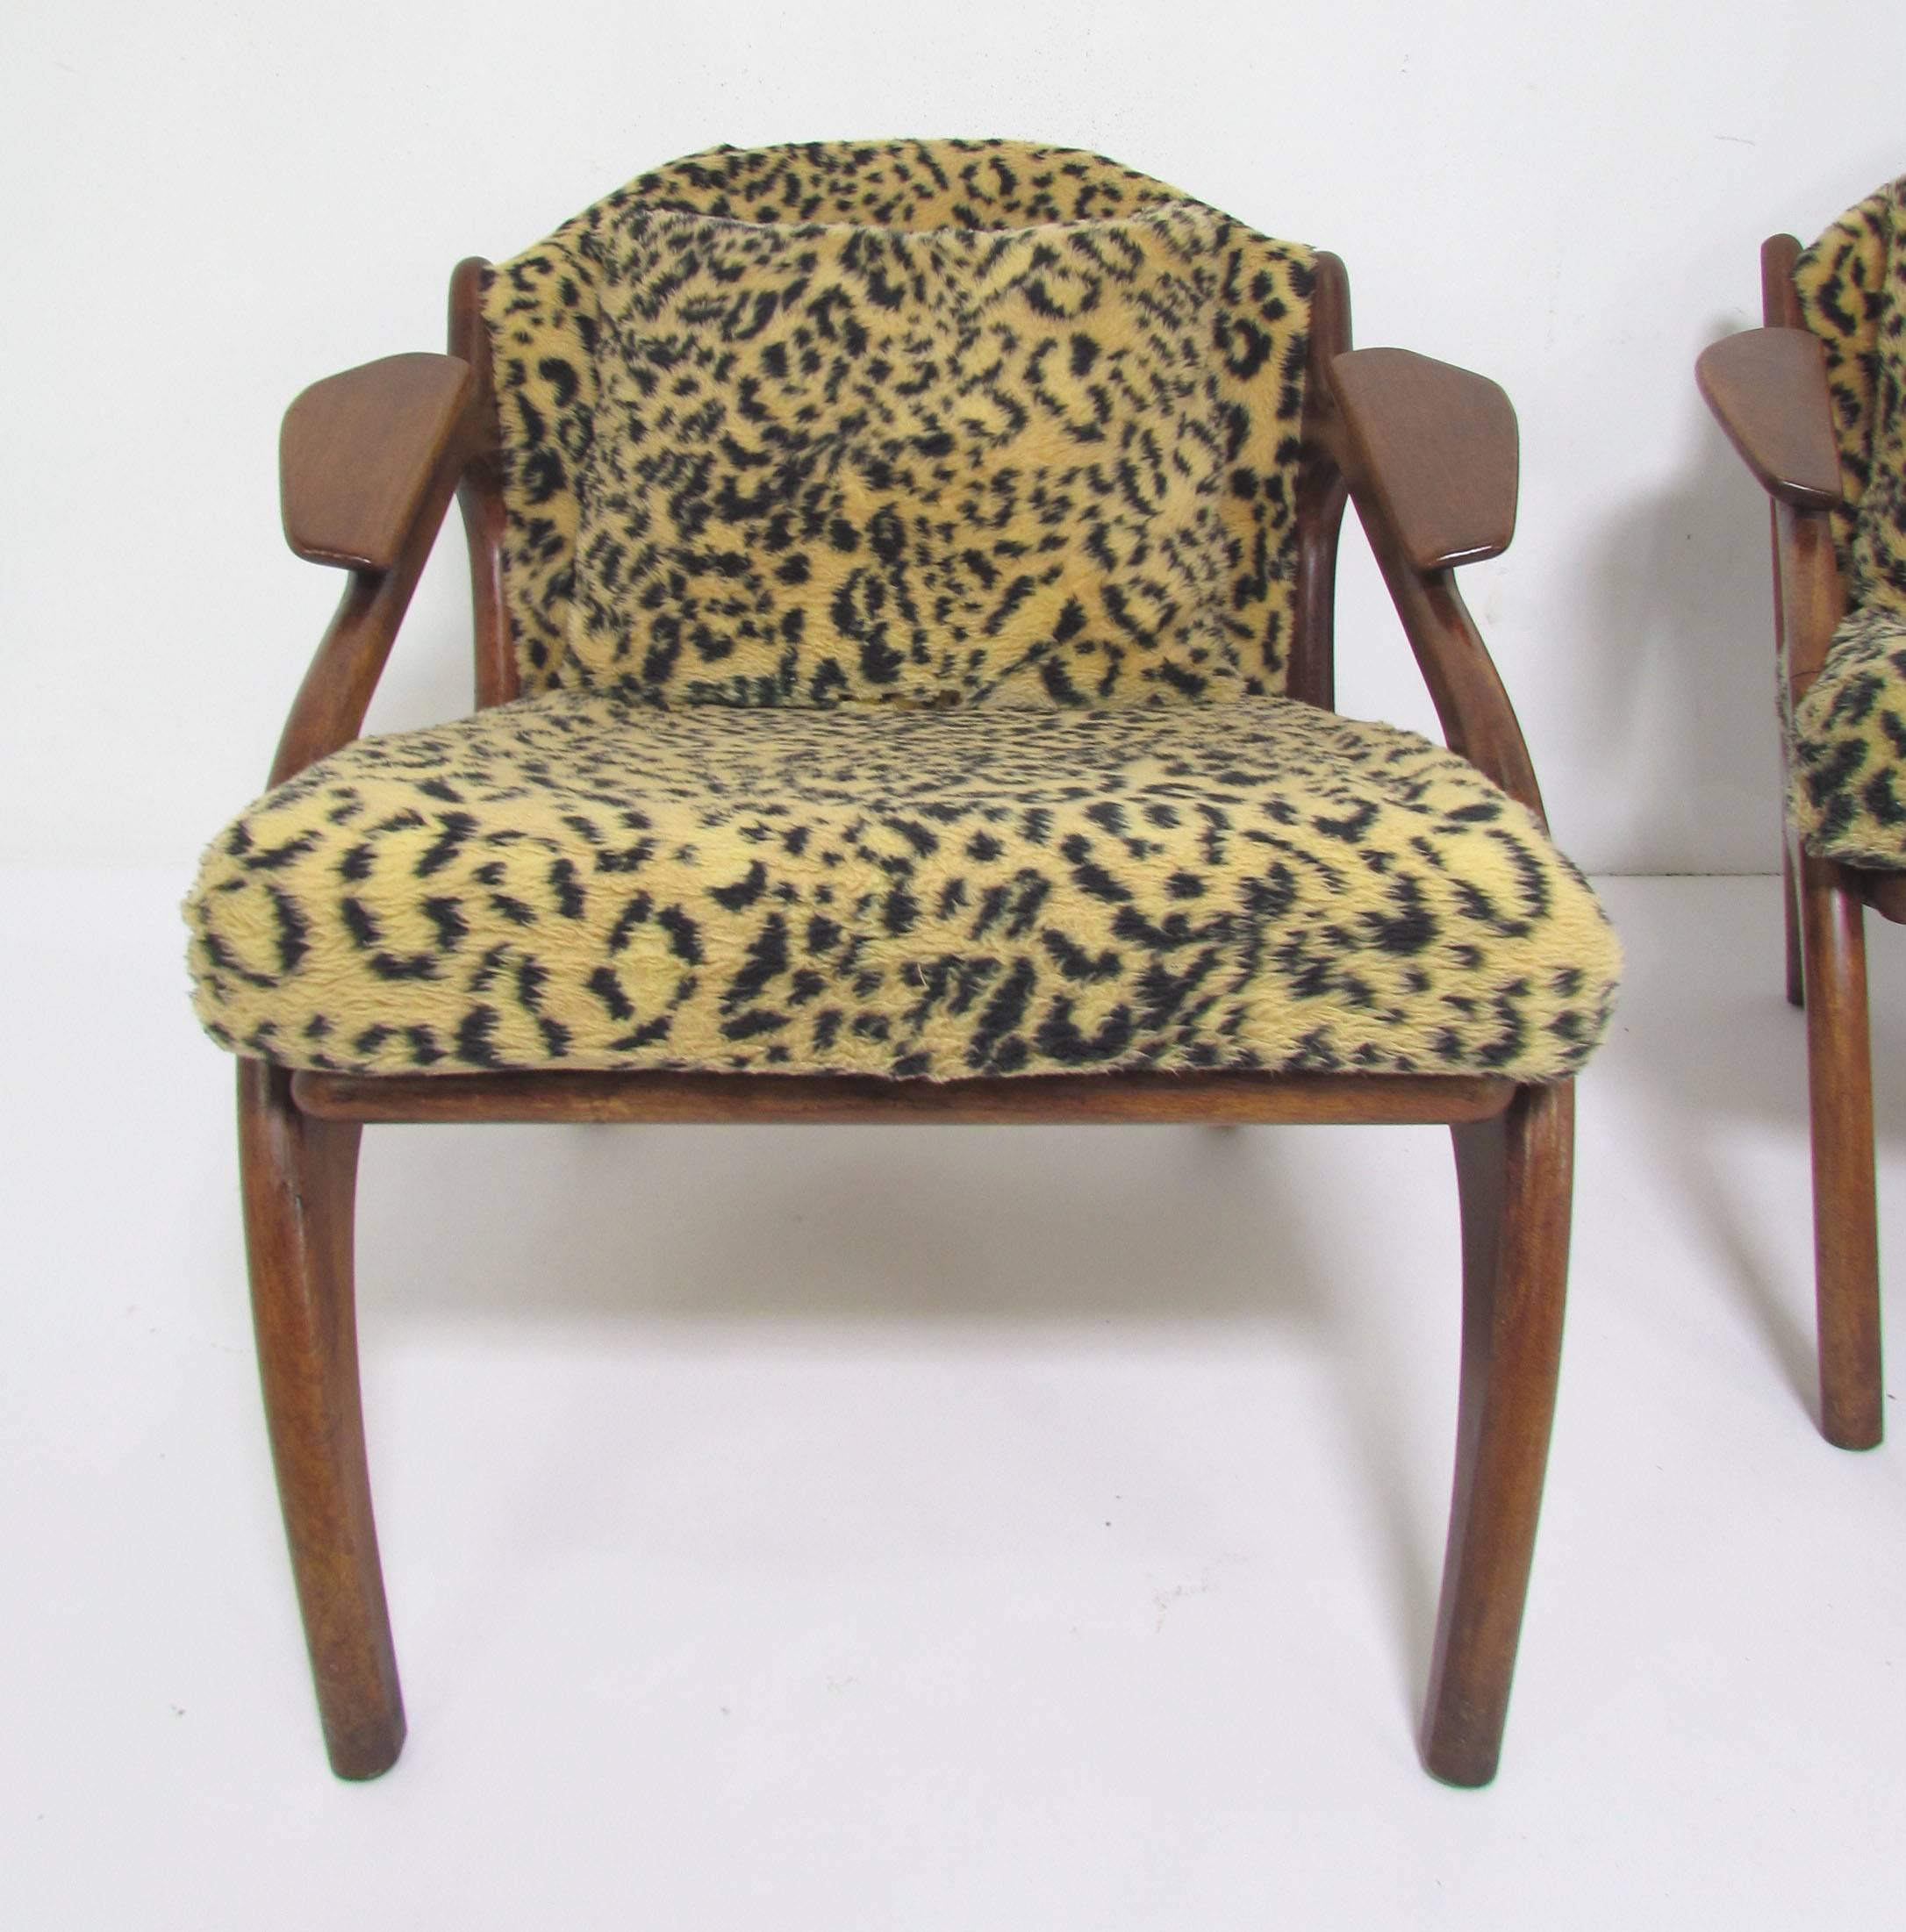 Pair of Sculptural Lounge Chairs by Adrian Pearsall for Craft Associates 1